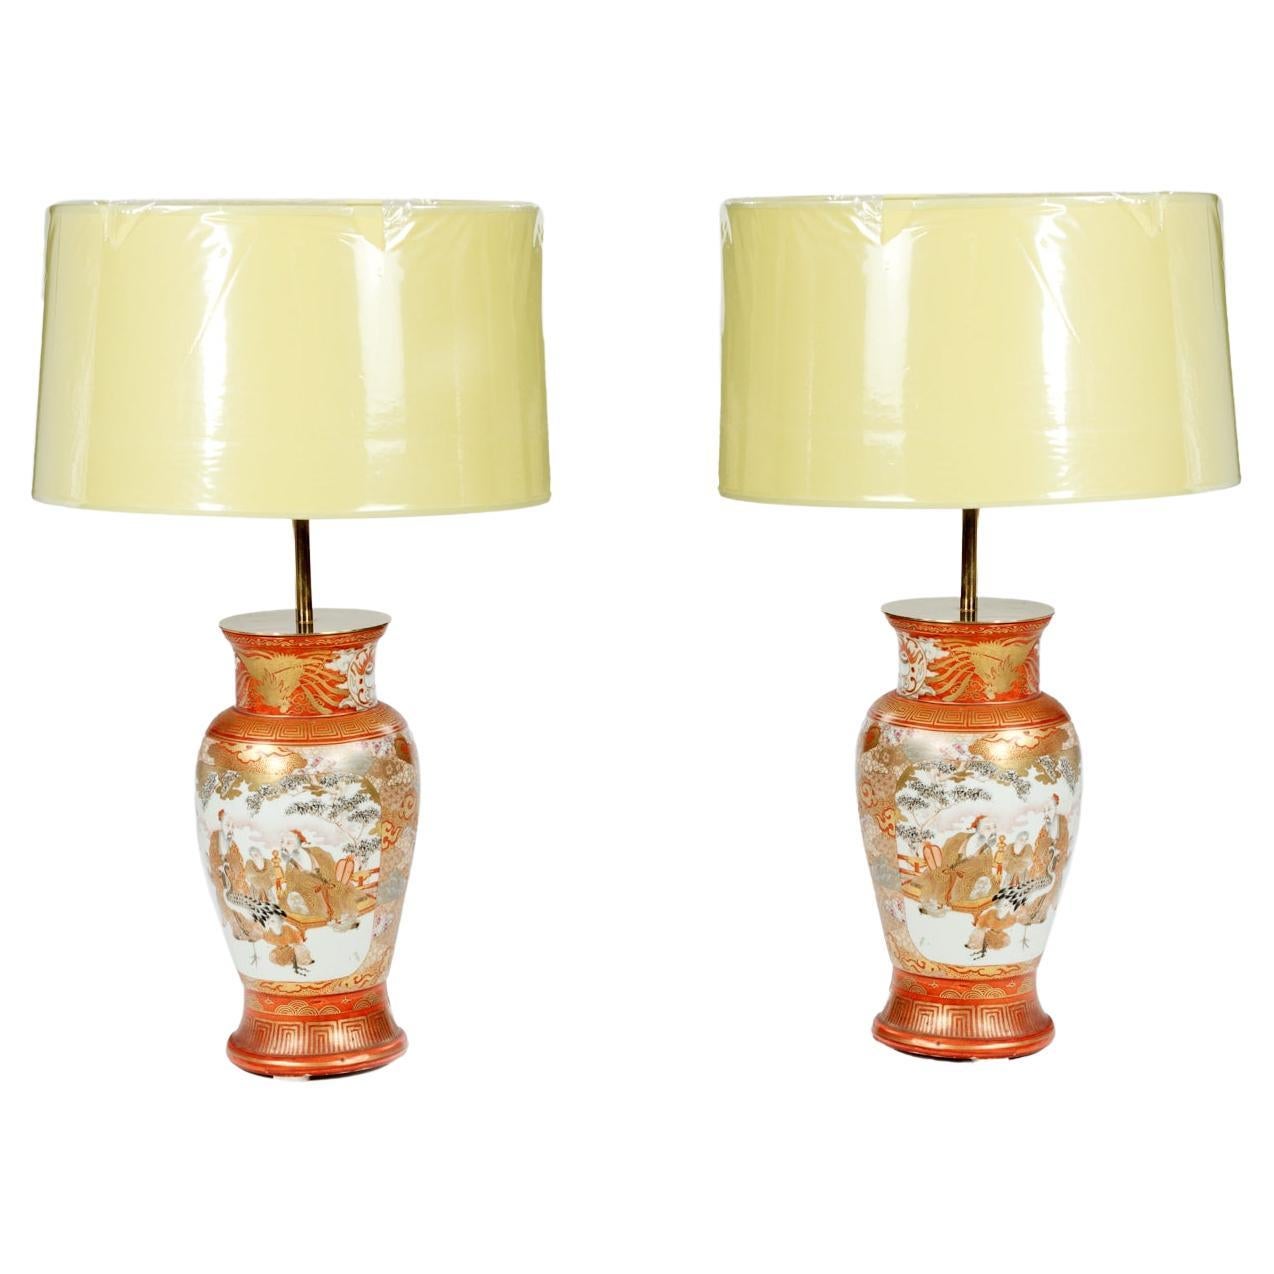 Pair of Antique Japanese Vases Converted into Table Lamps For Sale